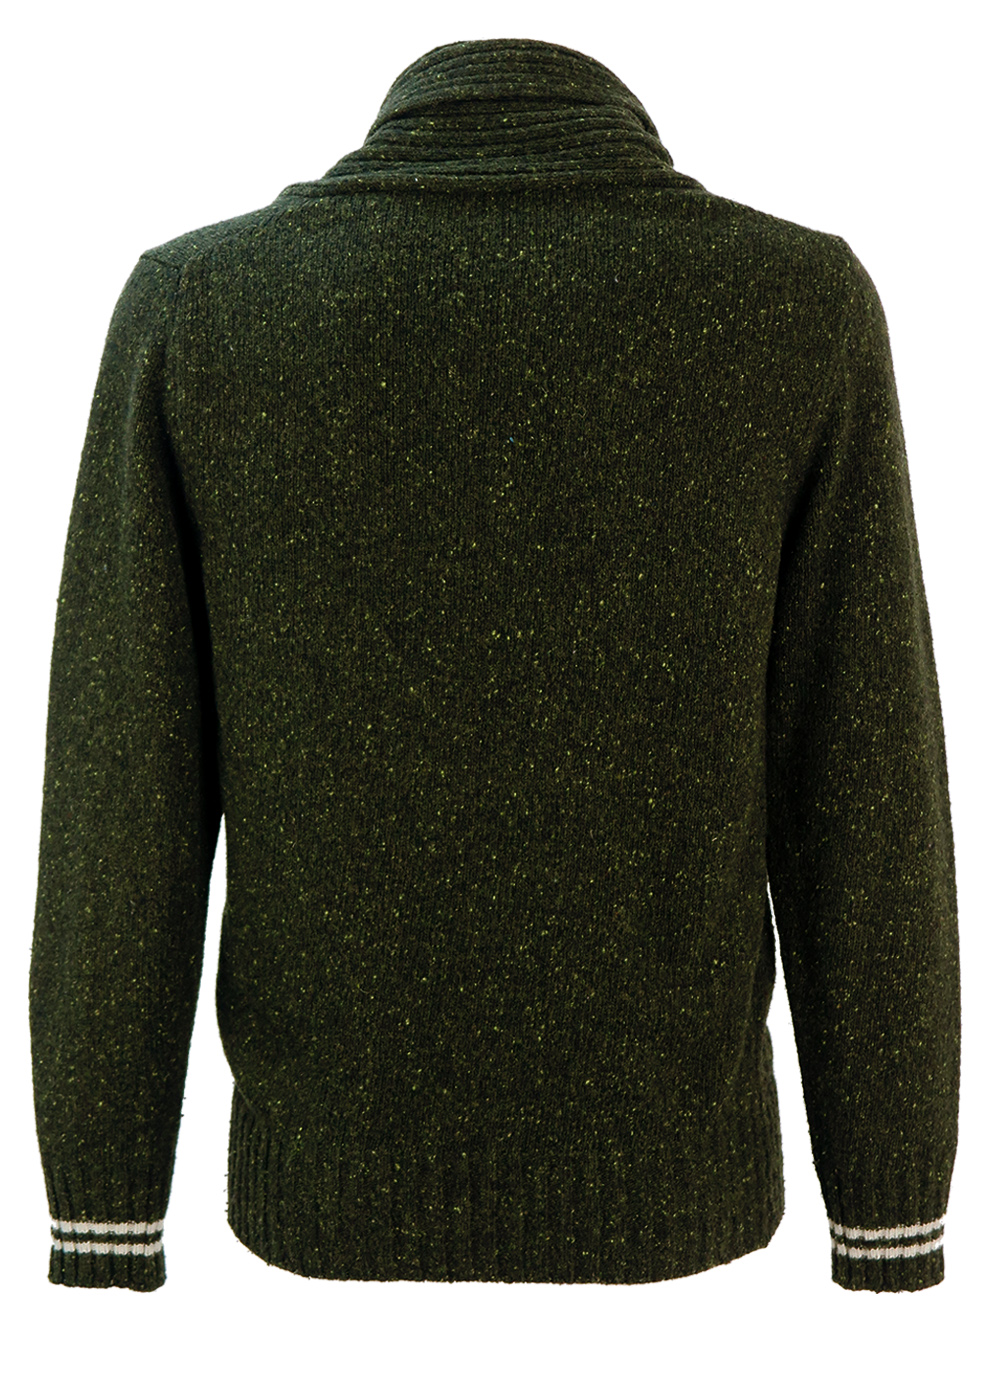 Fred Perry Two Tone Green Speckled Wool Jumper with Toggle Clasp - M ...